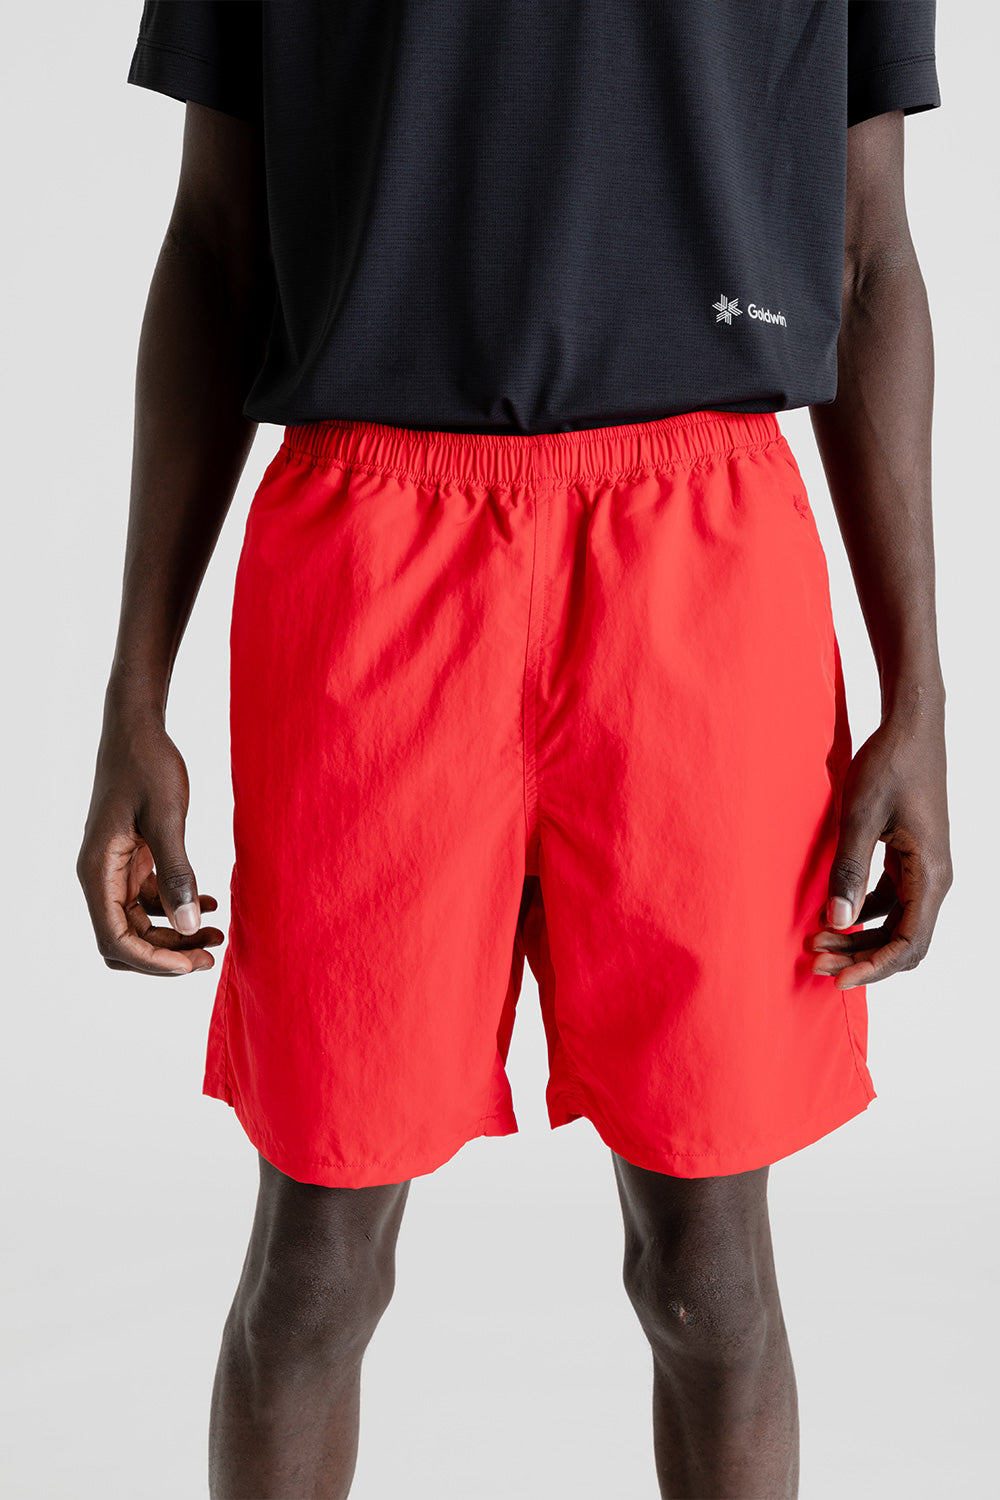 Nylon Shorts 7 inch - Fire Red